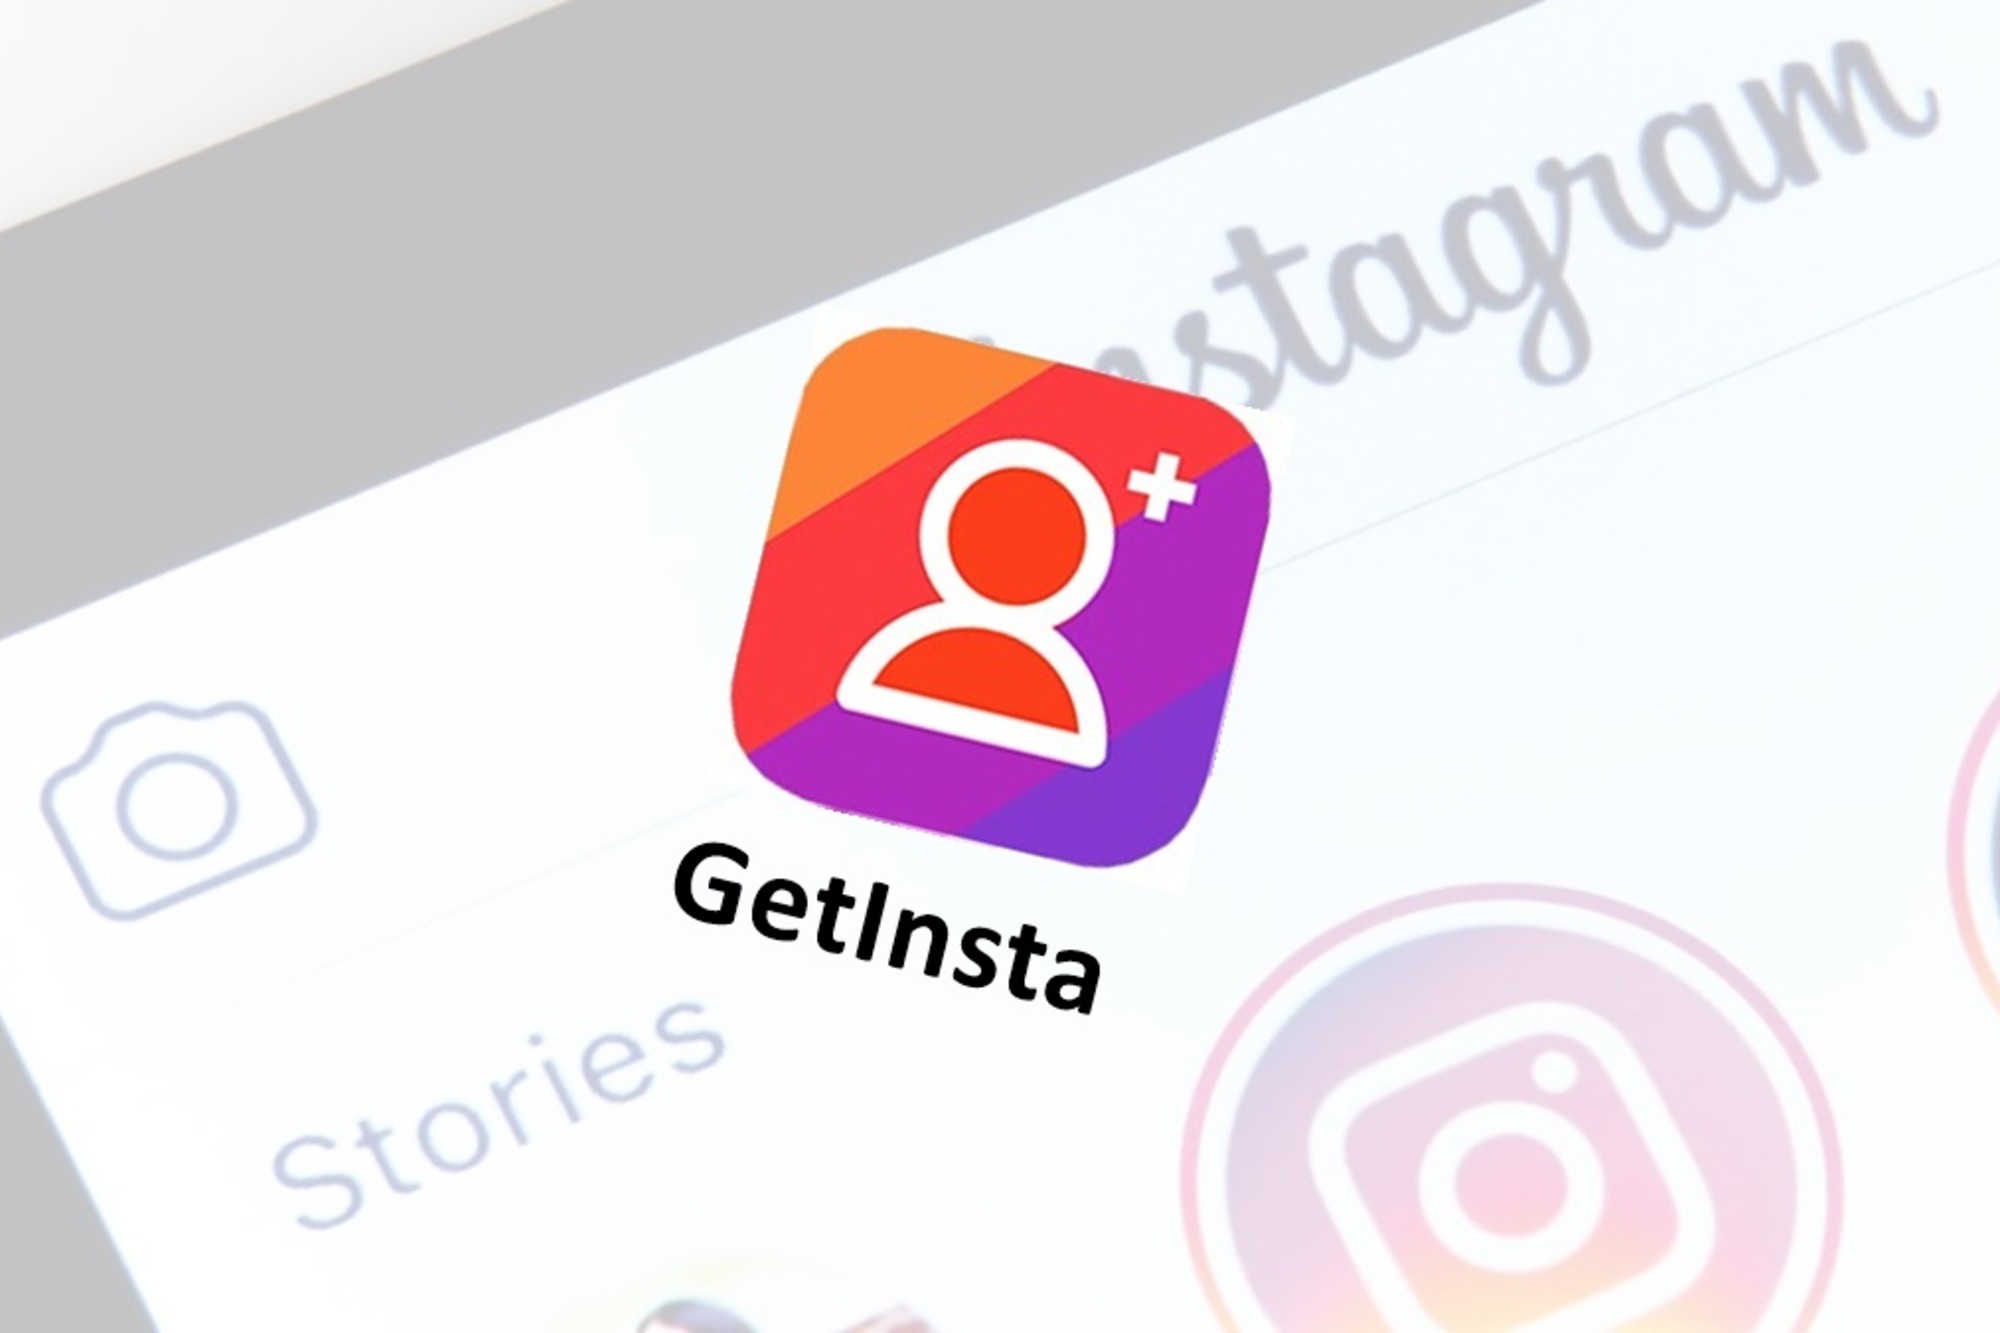 GetInsta: The Gateway to Boosting Your Instagram Followers